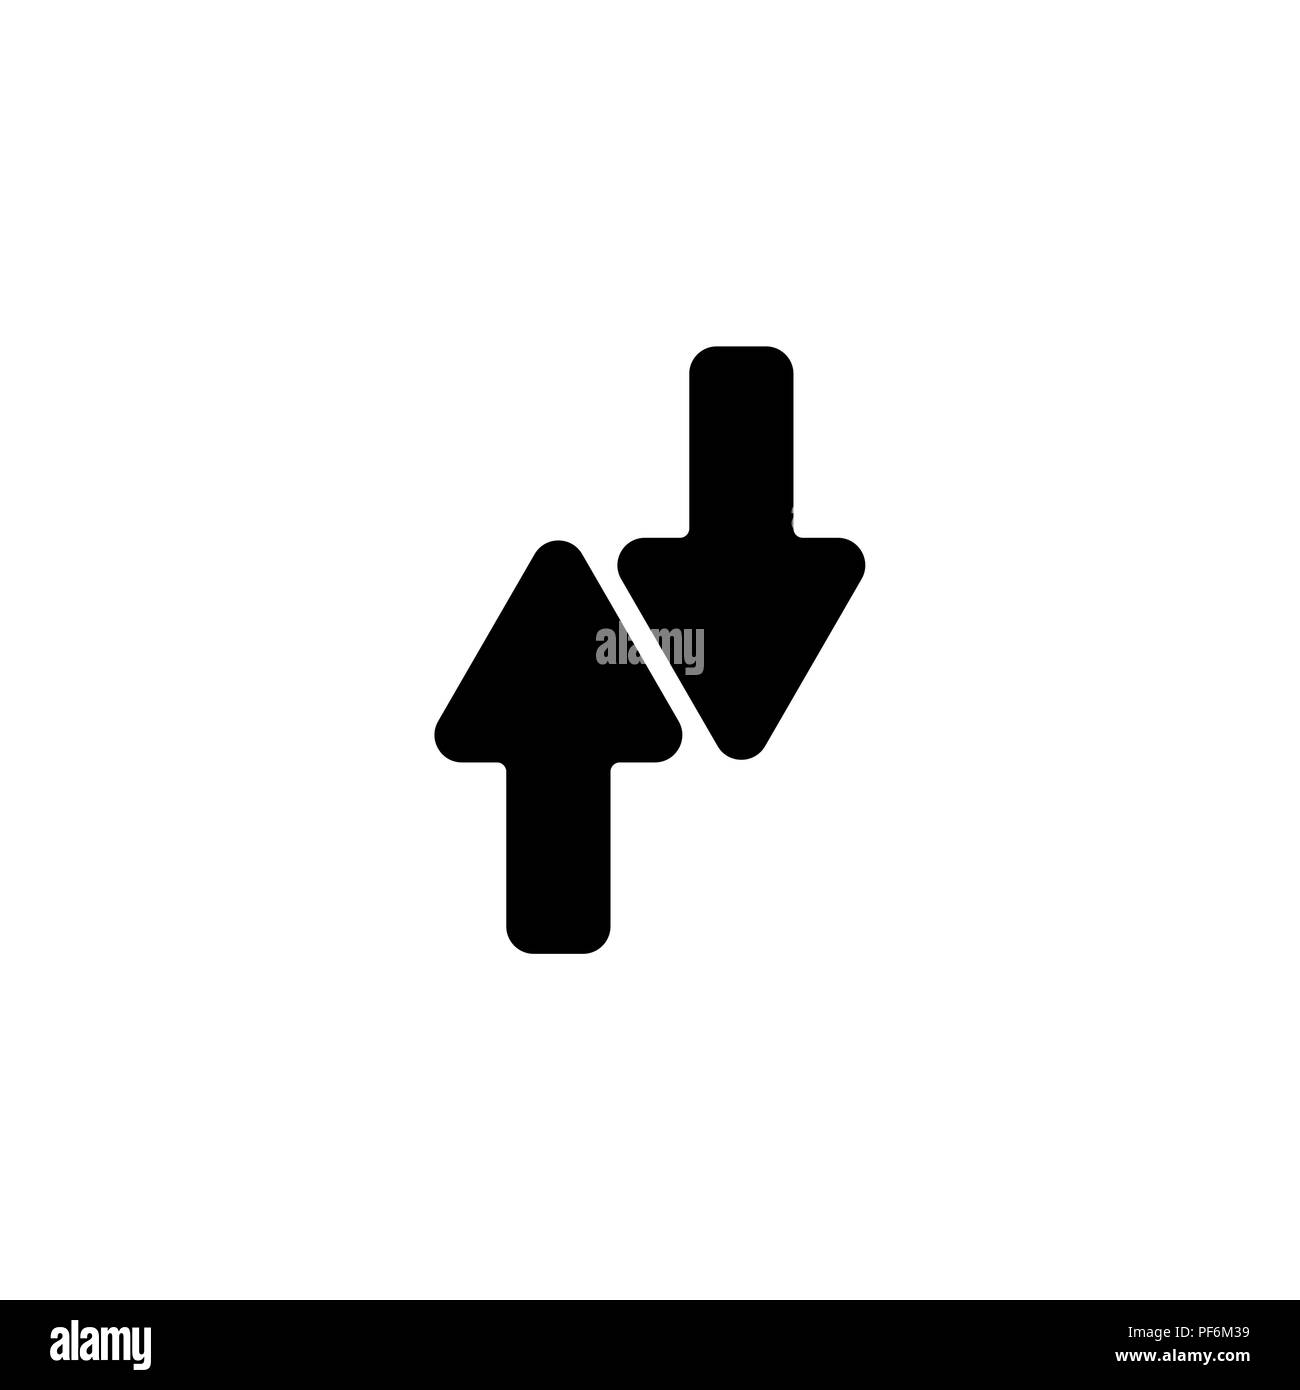 Web line icon. Arrows up-down black on white background Stock Vector